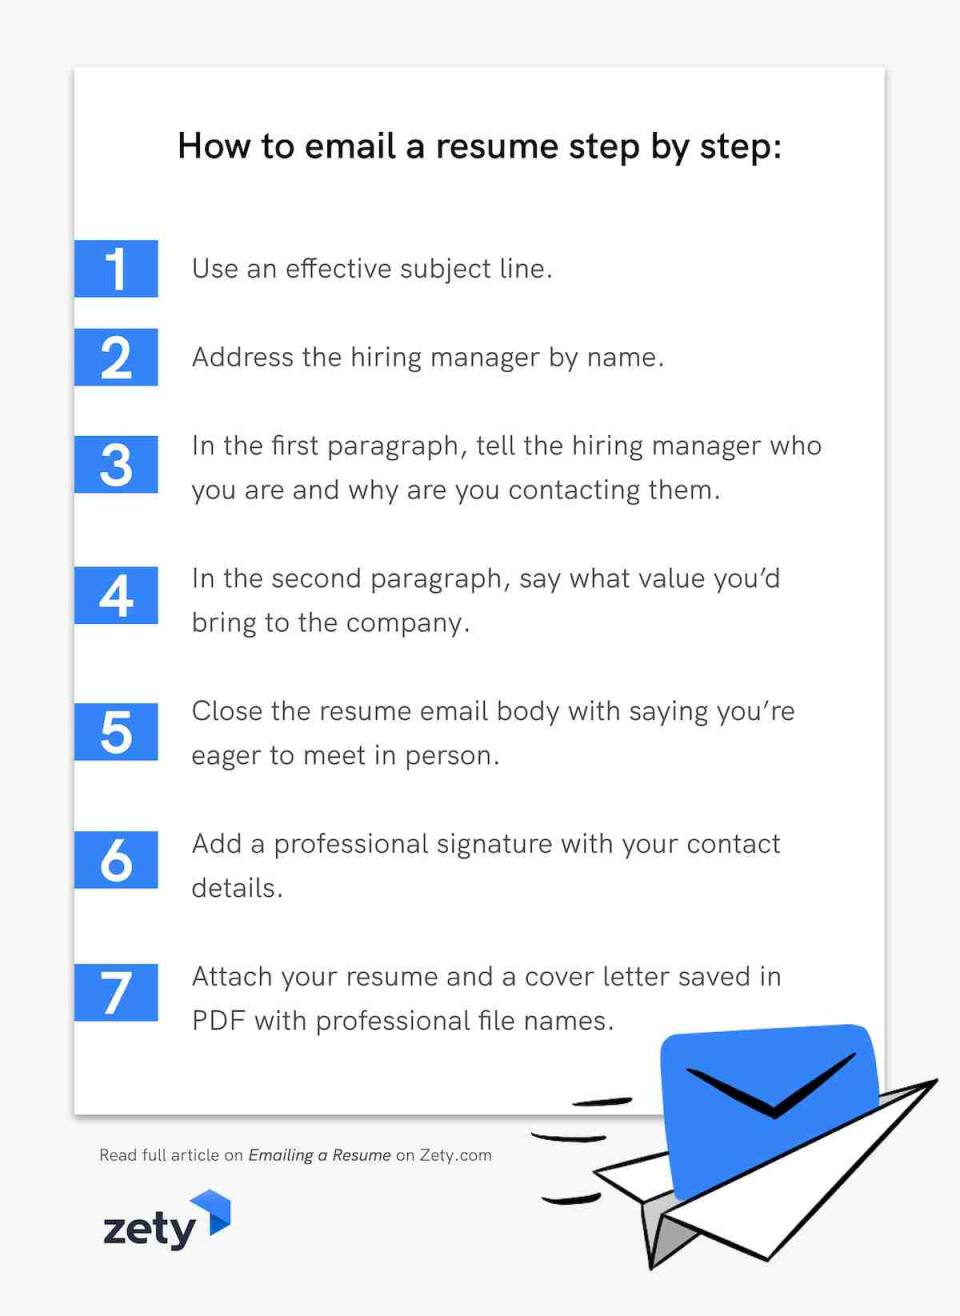 Emailing a Resume: 18+ Job Application Email Samples